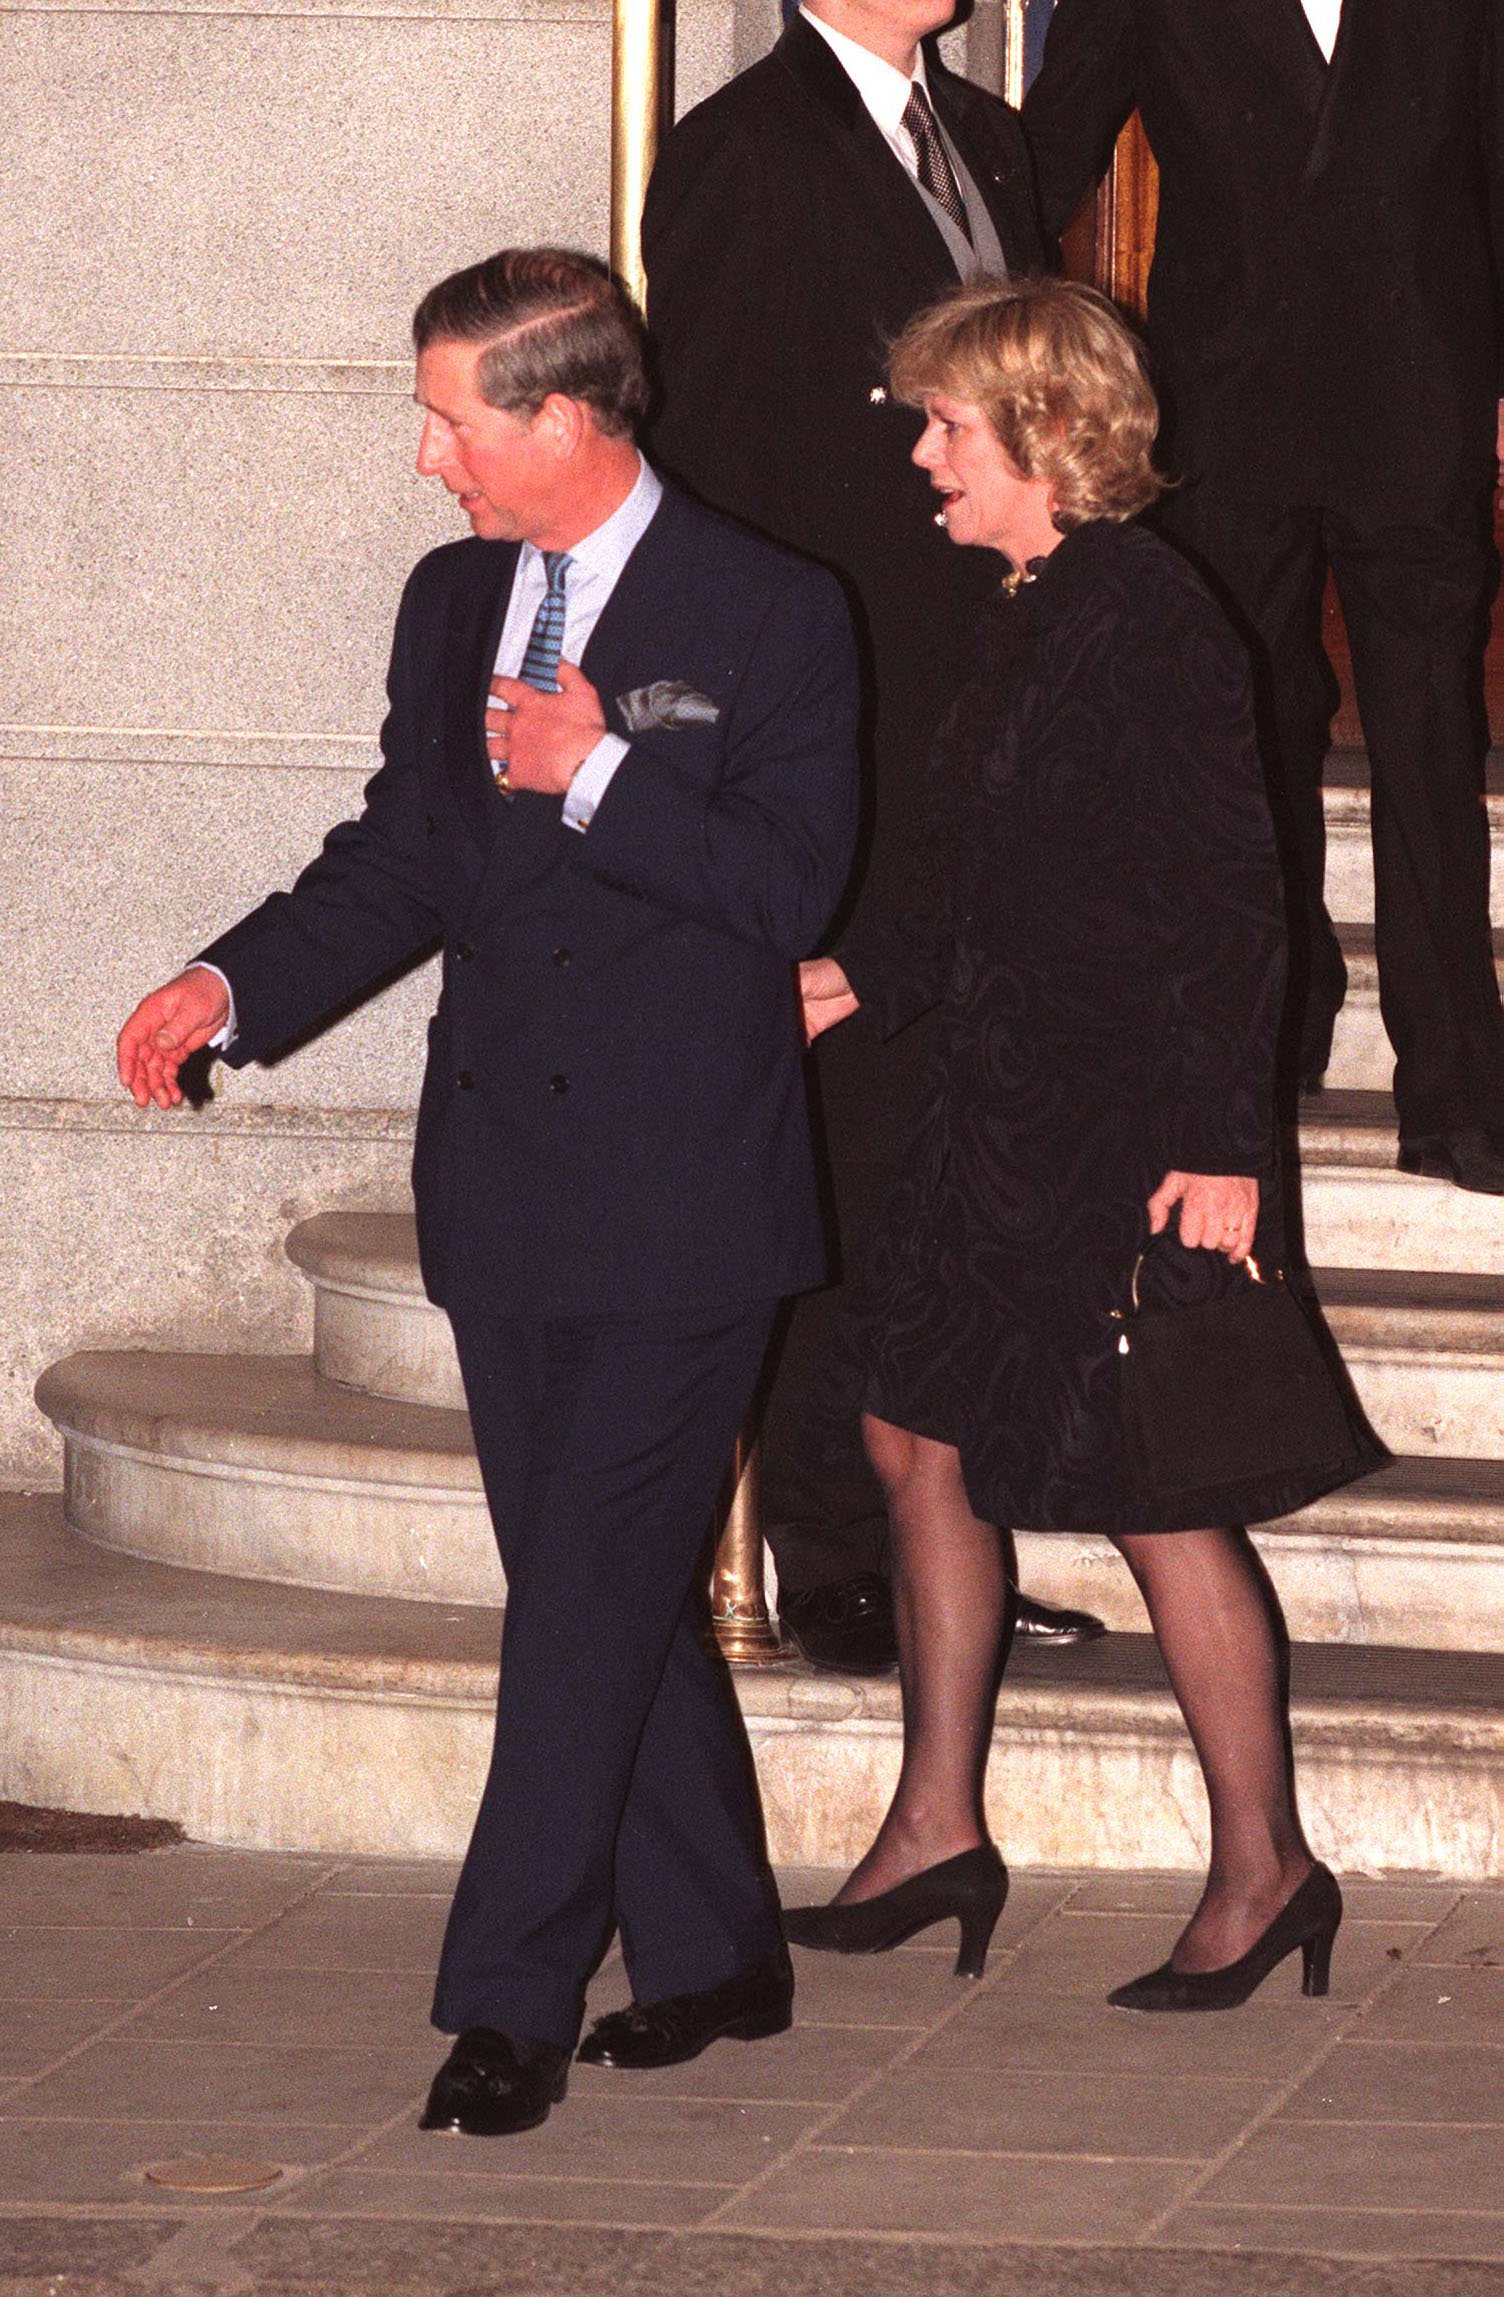 Prince Charles and Camilla Parker Bowles at the Ritz hotel on January 28, 1999 | Source: Getty Images